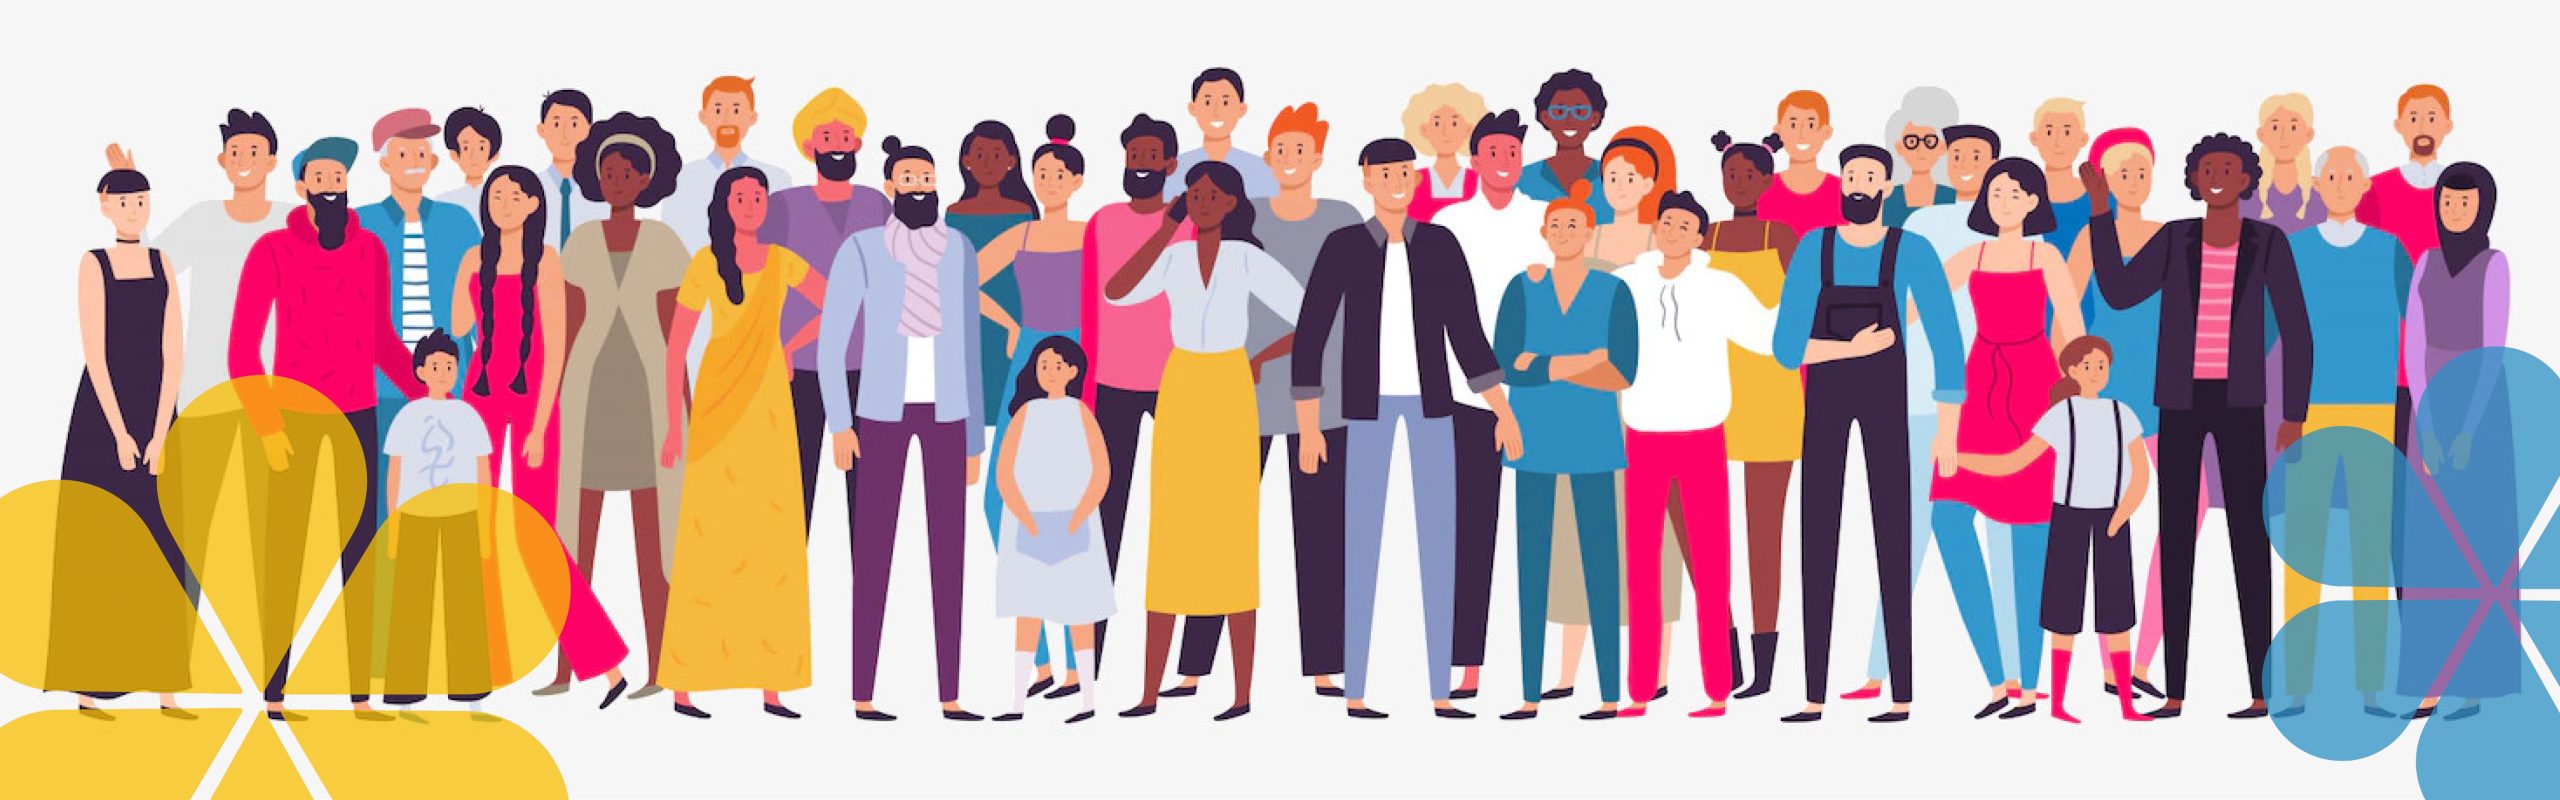 A illustration of a very large group of people that are very diverse